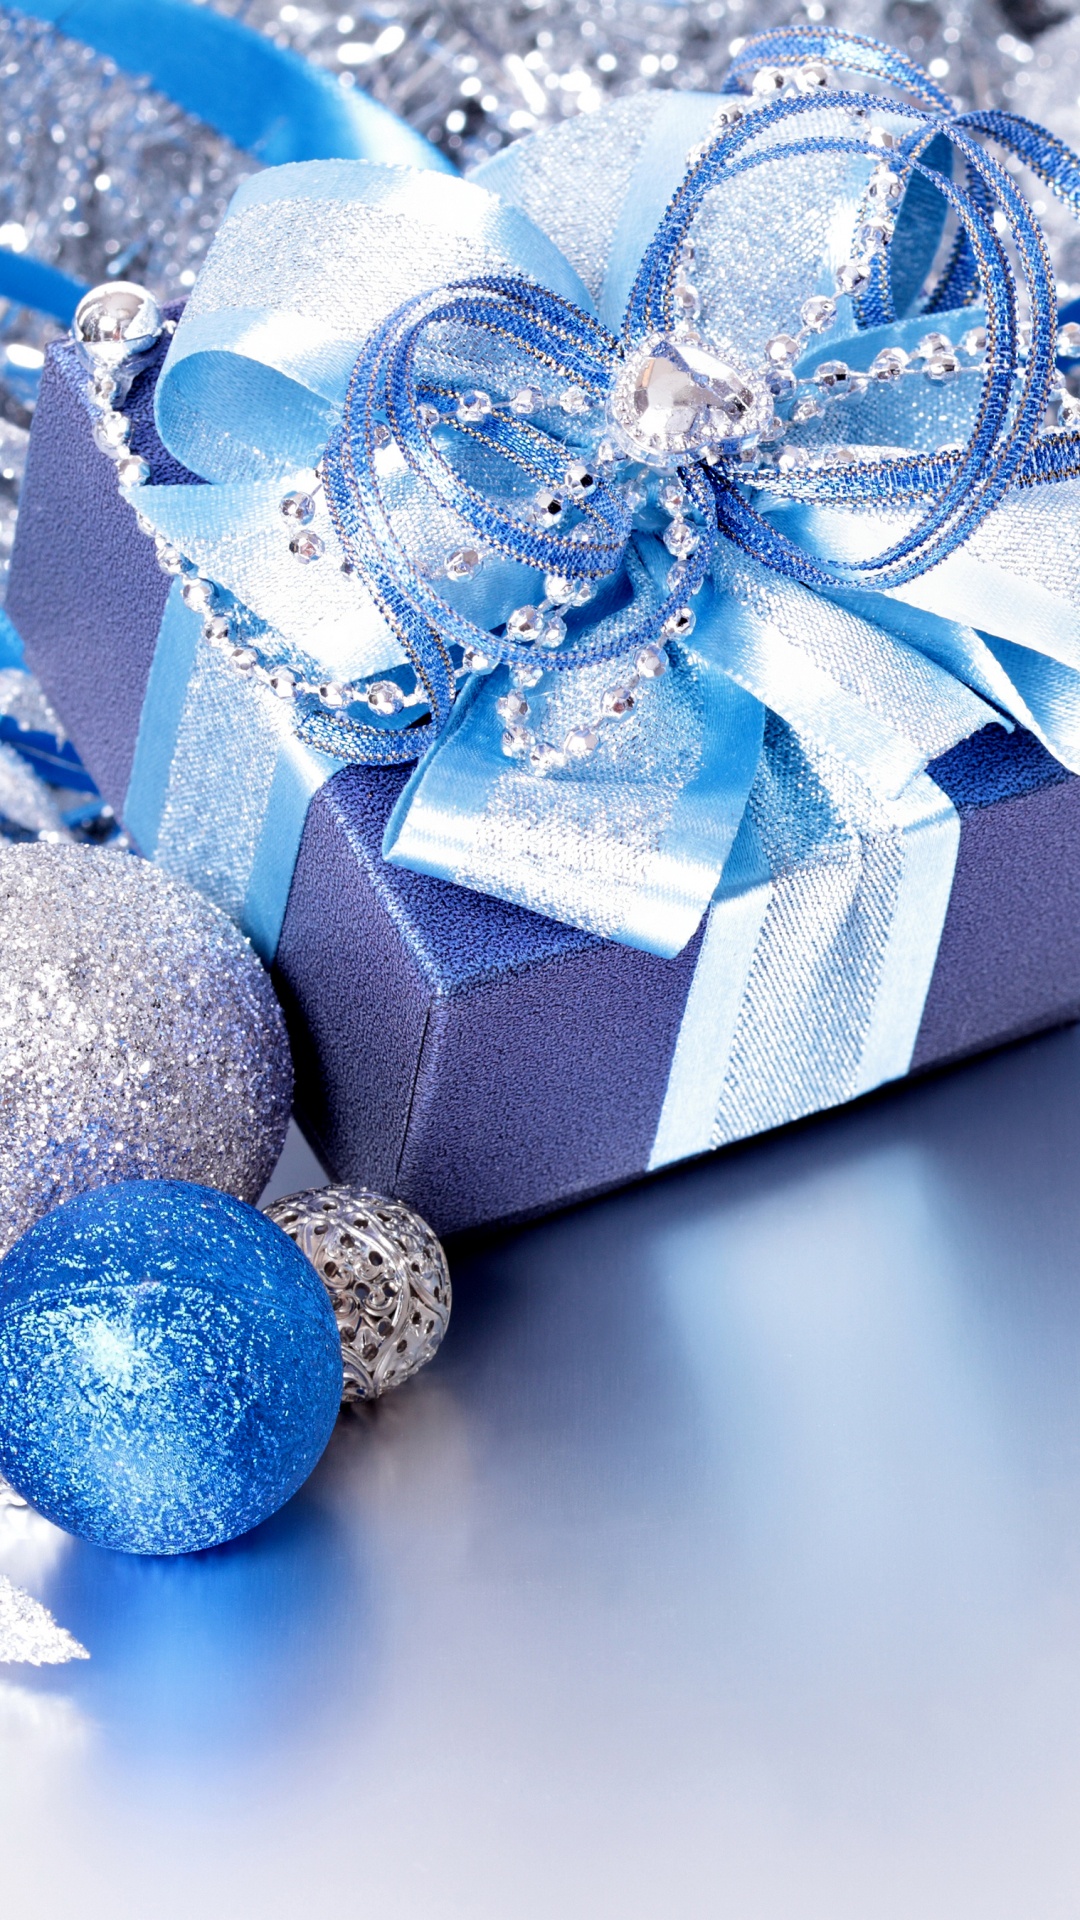 Christmas Day, Christmas Ornament, Christmas Decoration, Gift, Blue. Wallpaper in 1080x1920 Resolution